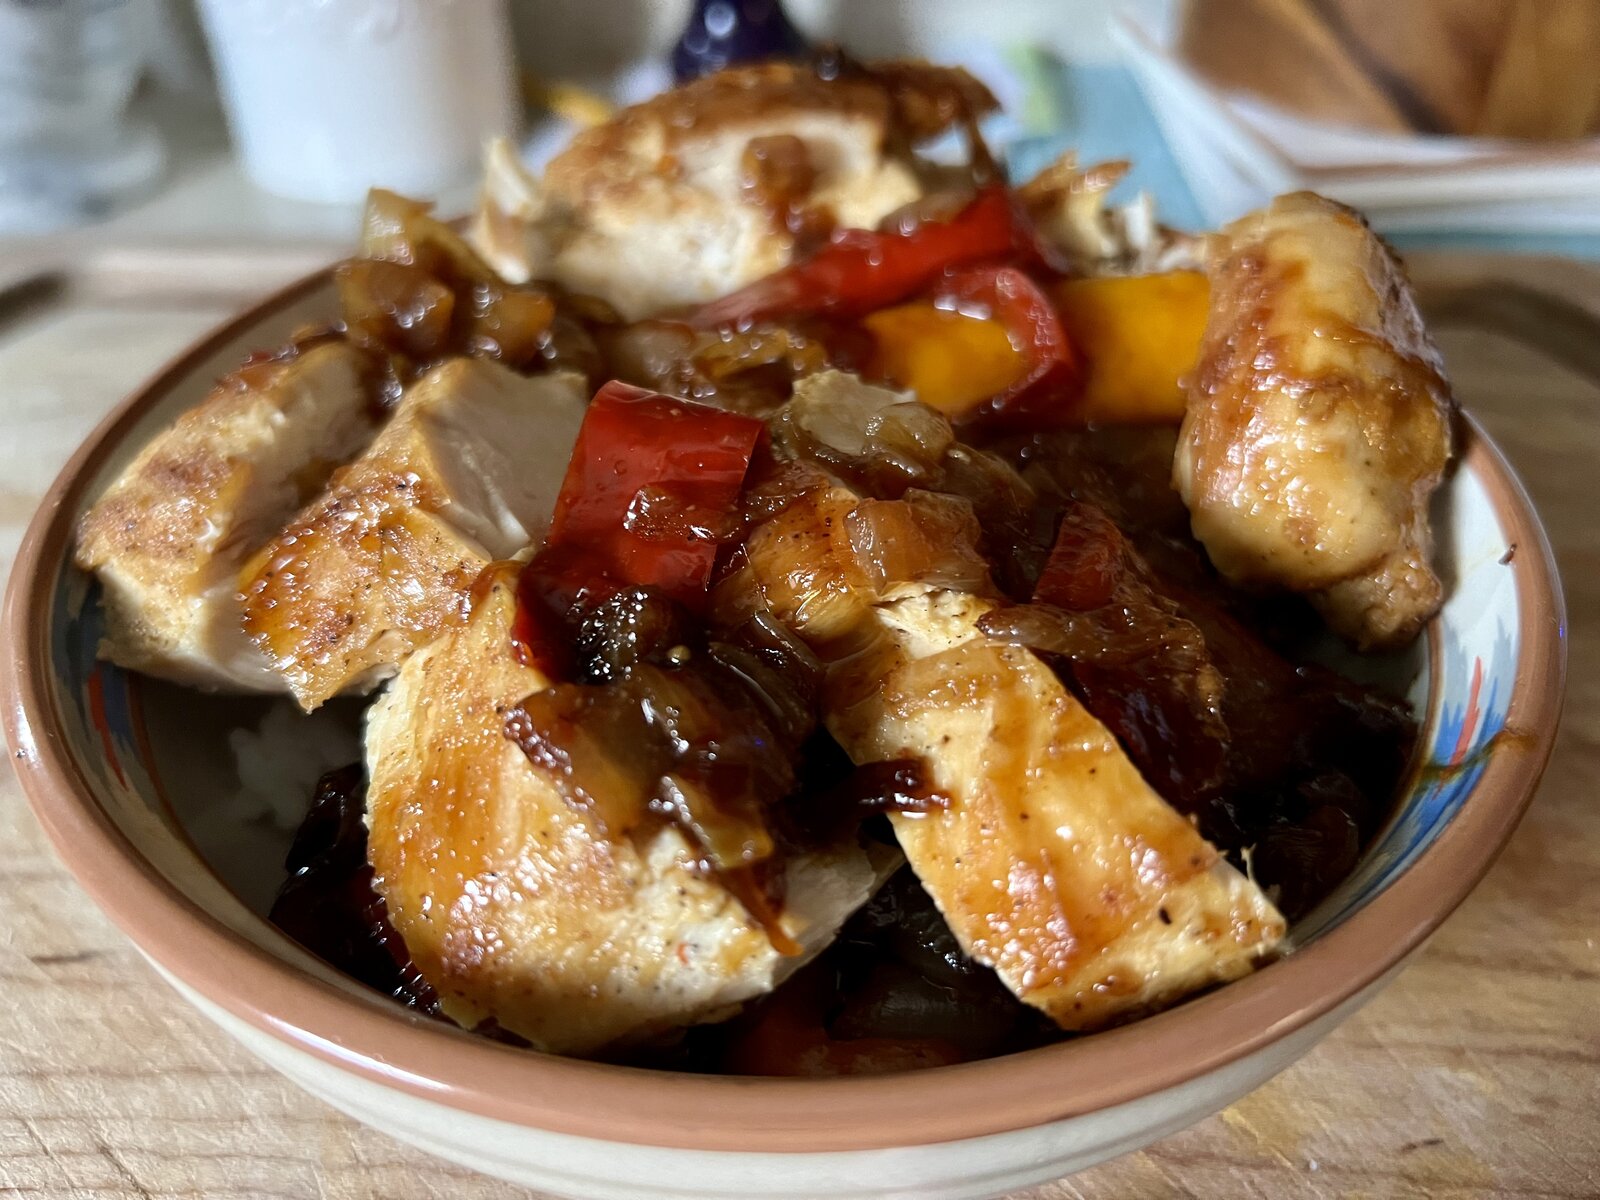 Ginger-Marinated Chicken with Onions and Peppers